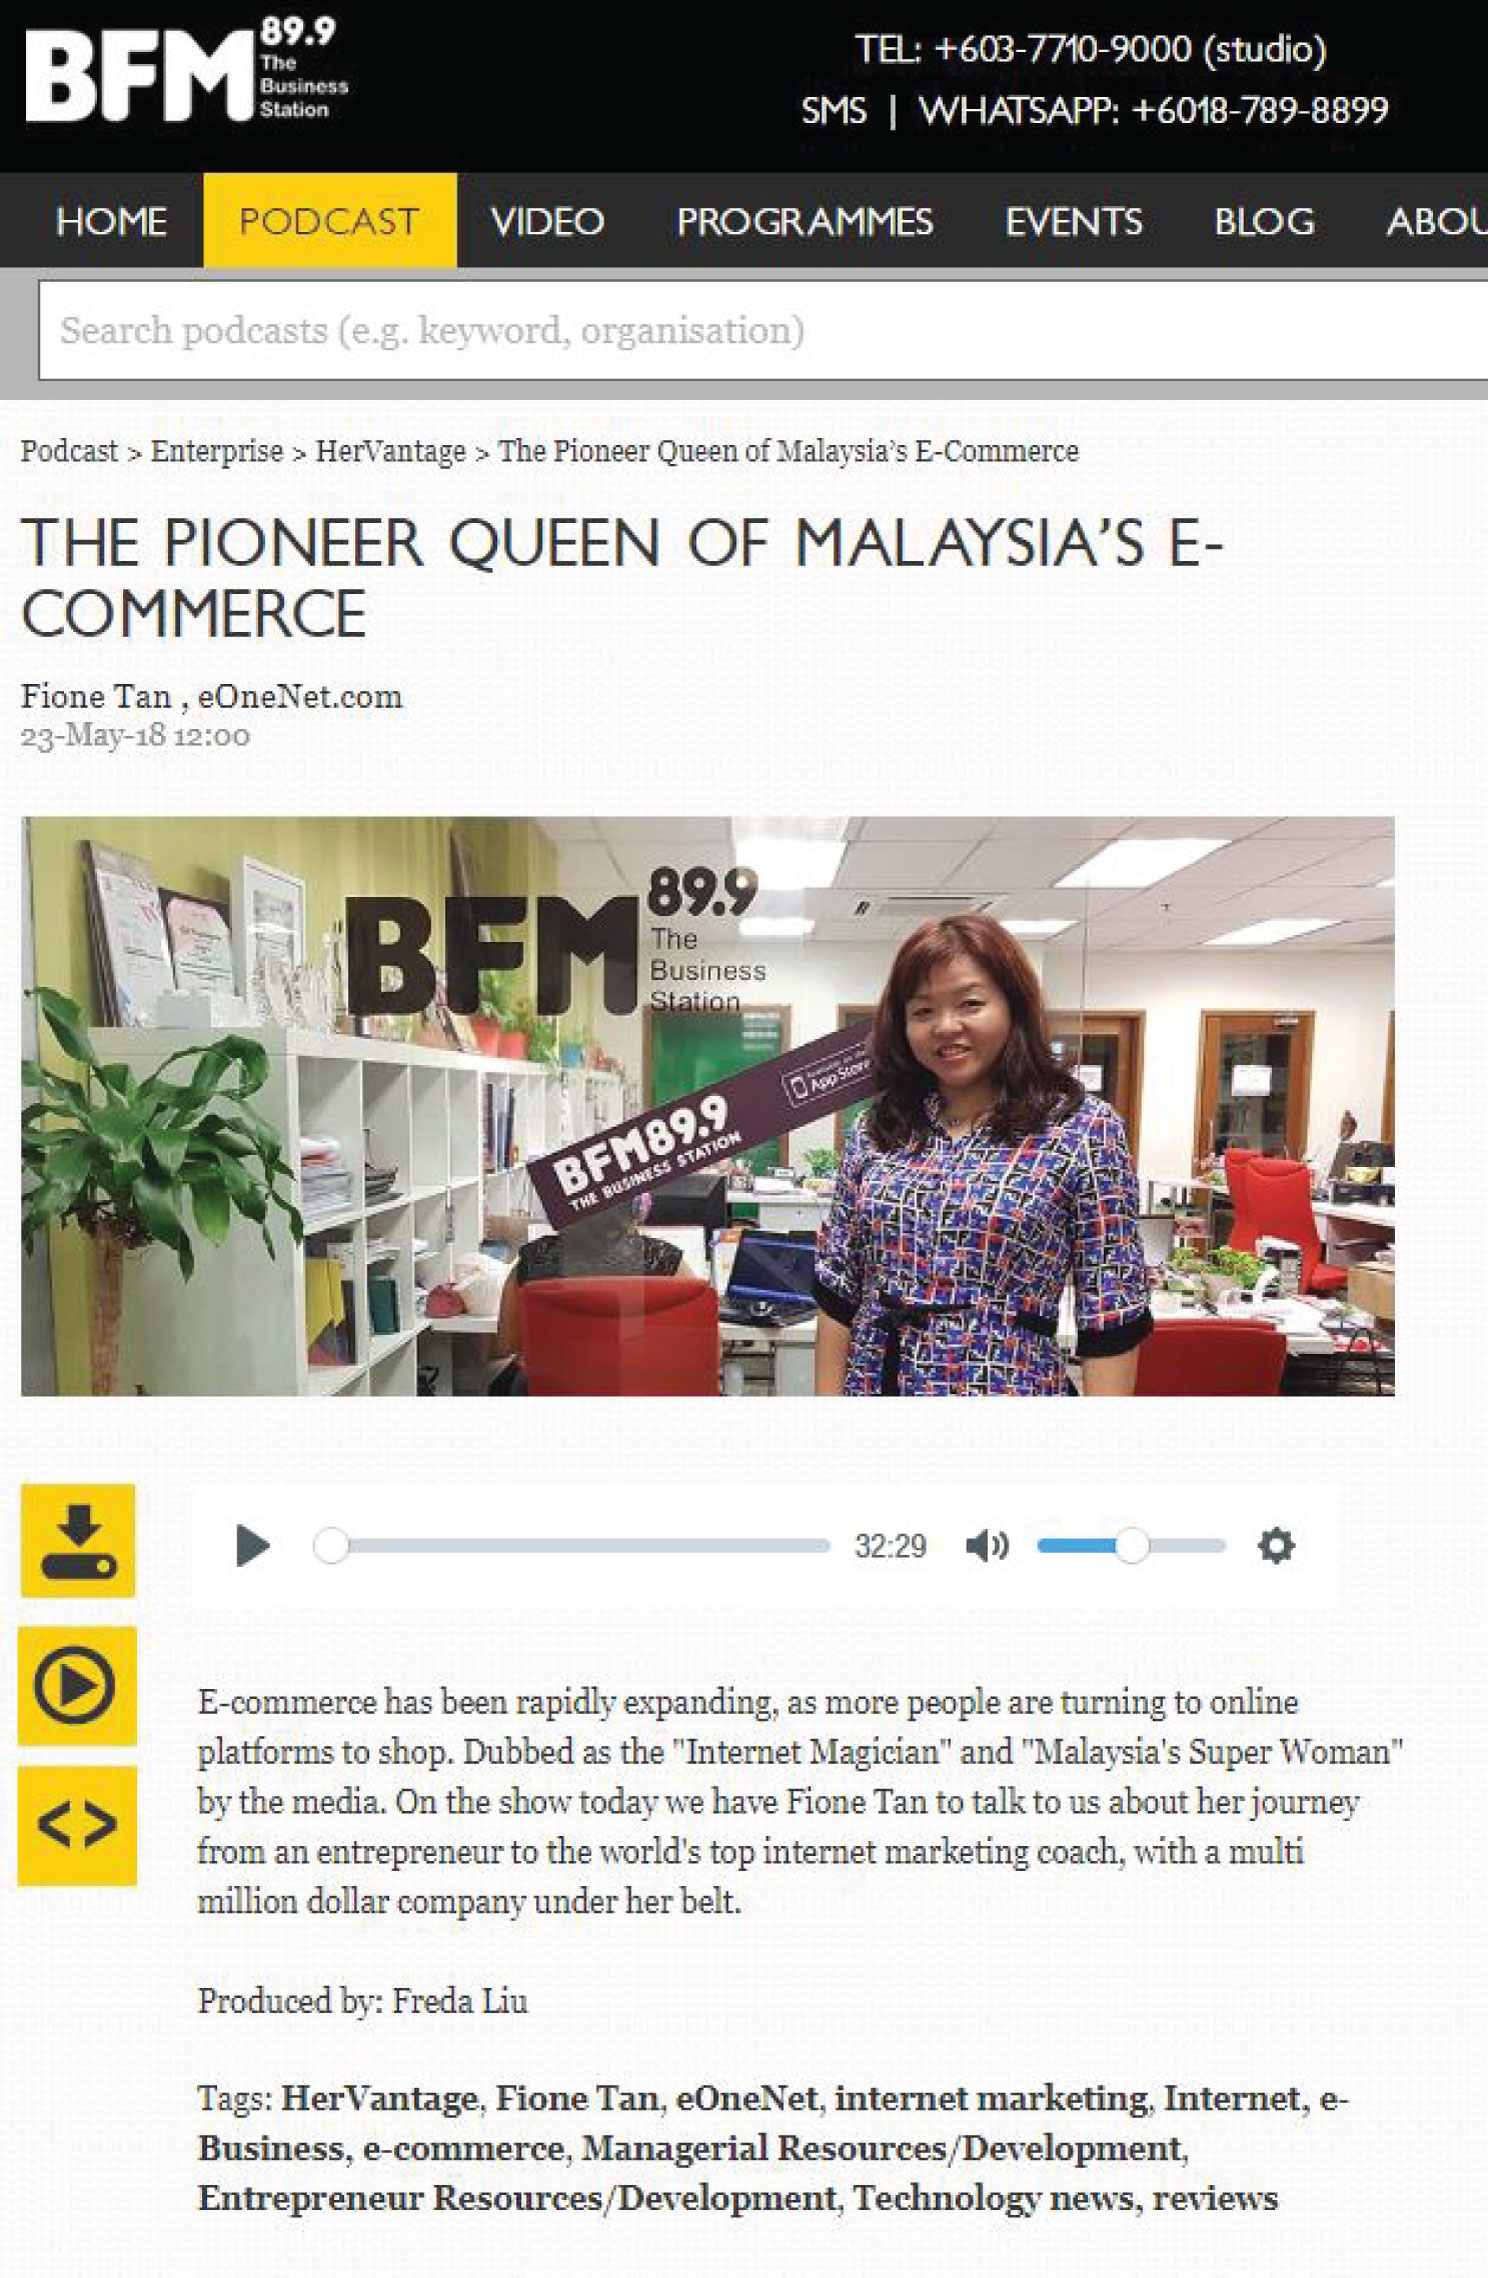 The Pioneer Queen of Malaysia's e-Commerce